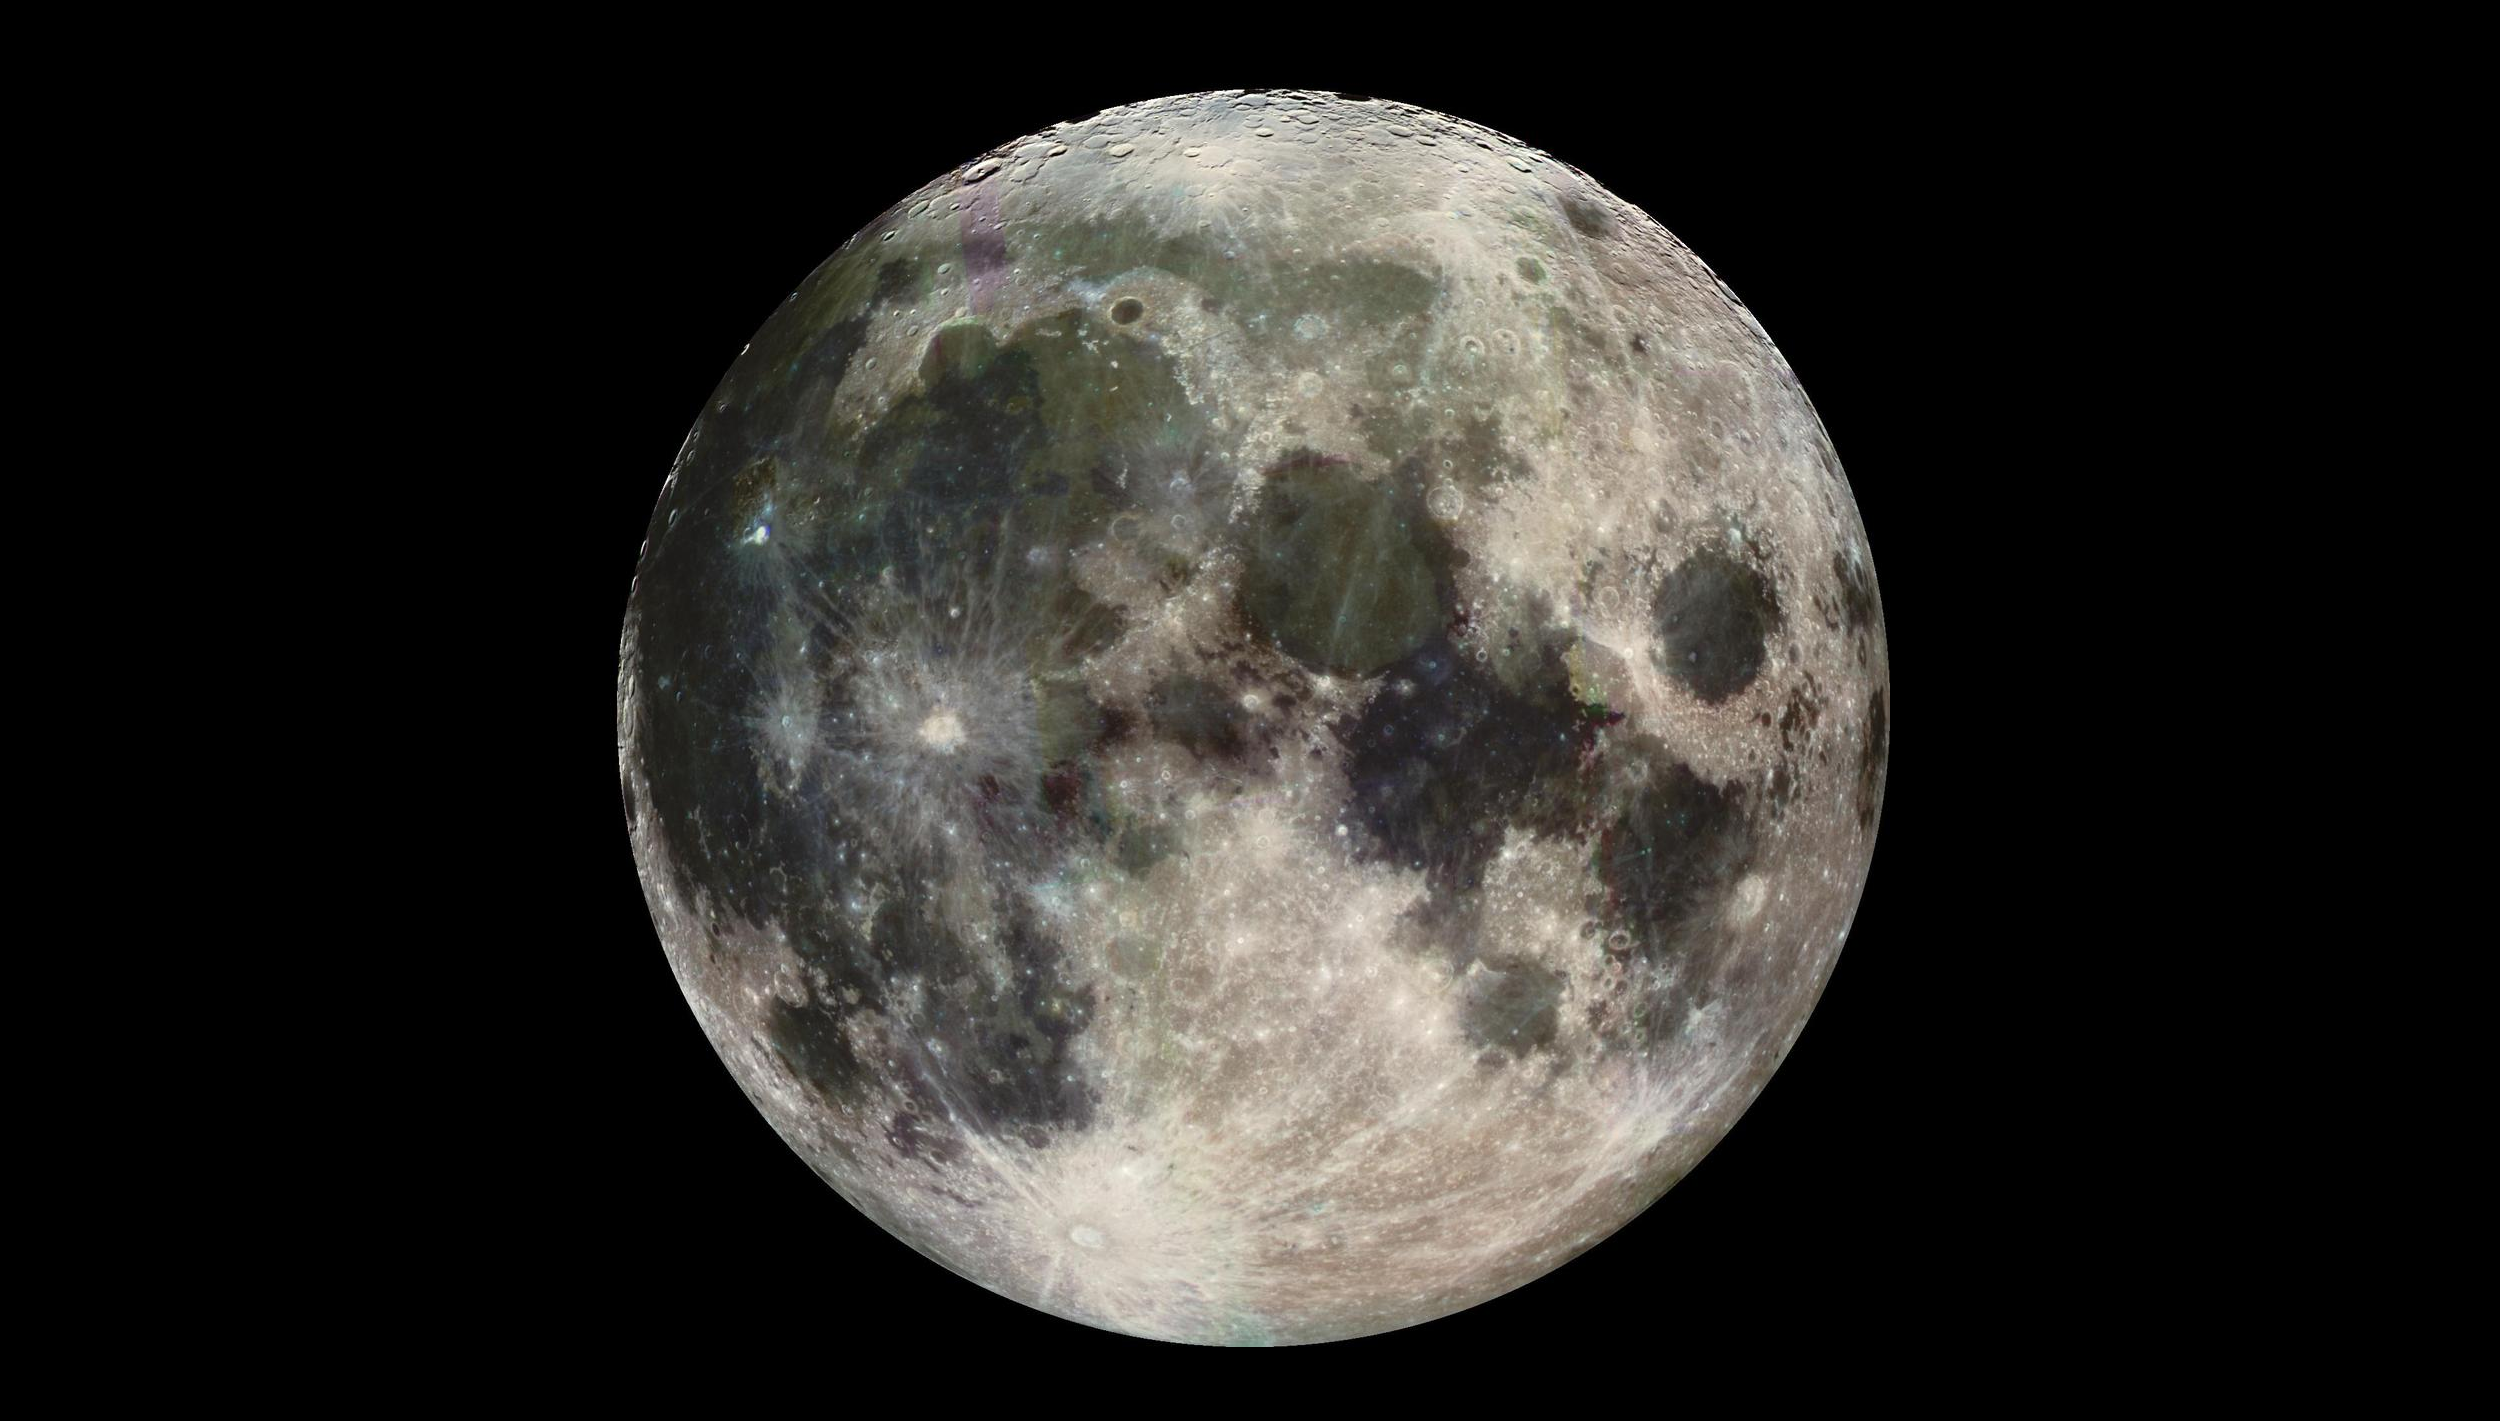 The full Moon, with Tycho the bright lunar crater near the bottom with lots of prominent rays around it